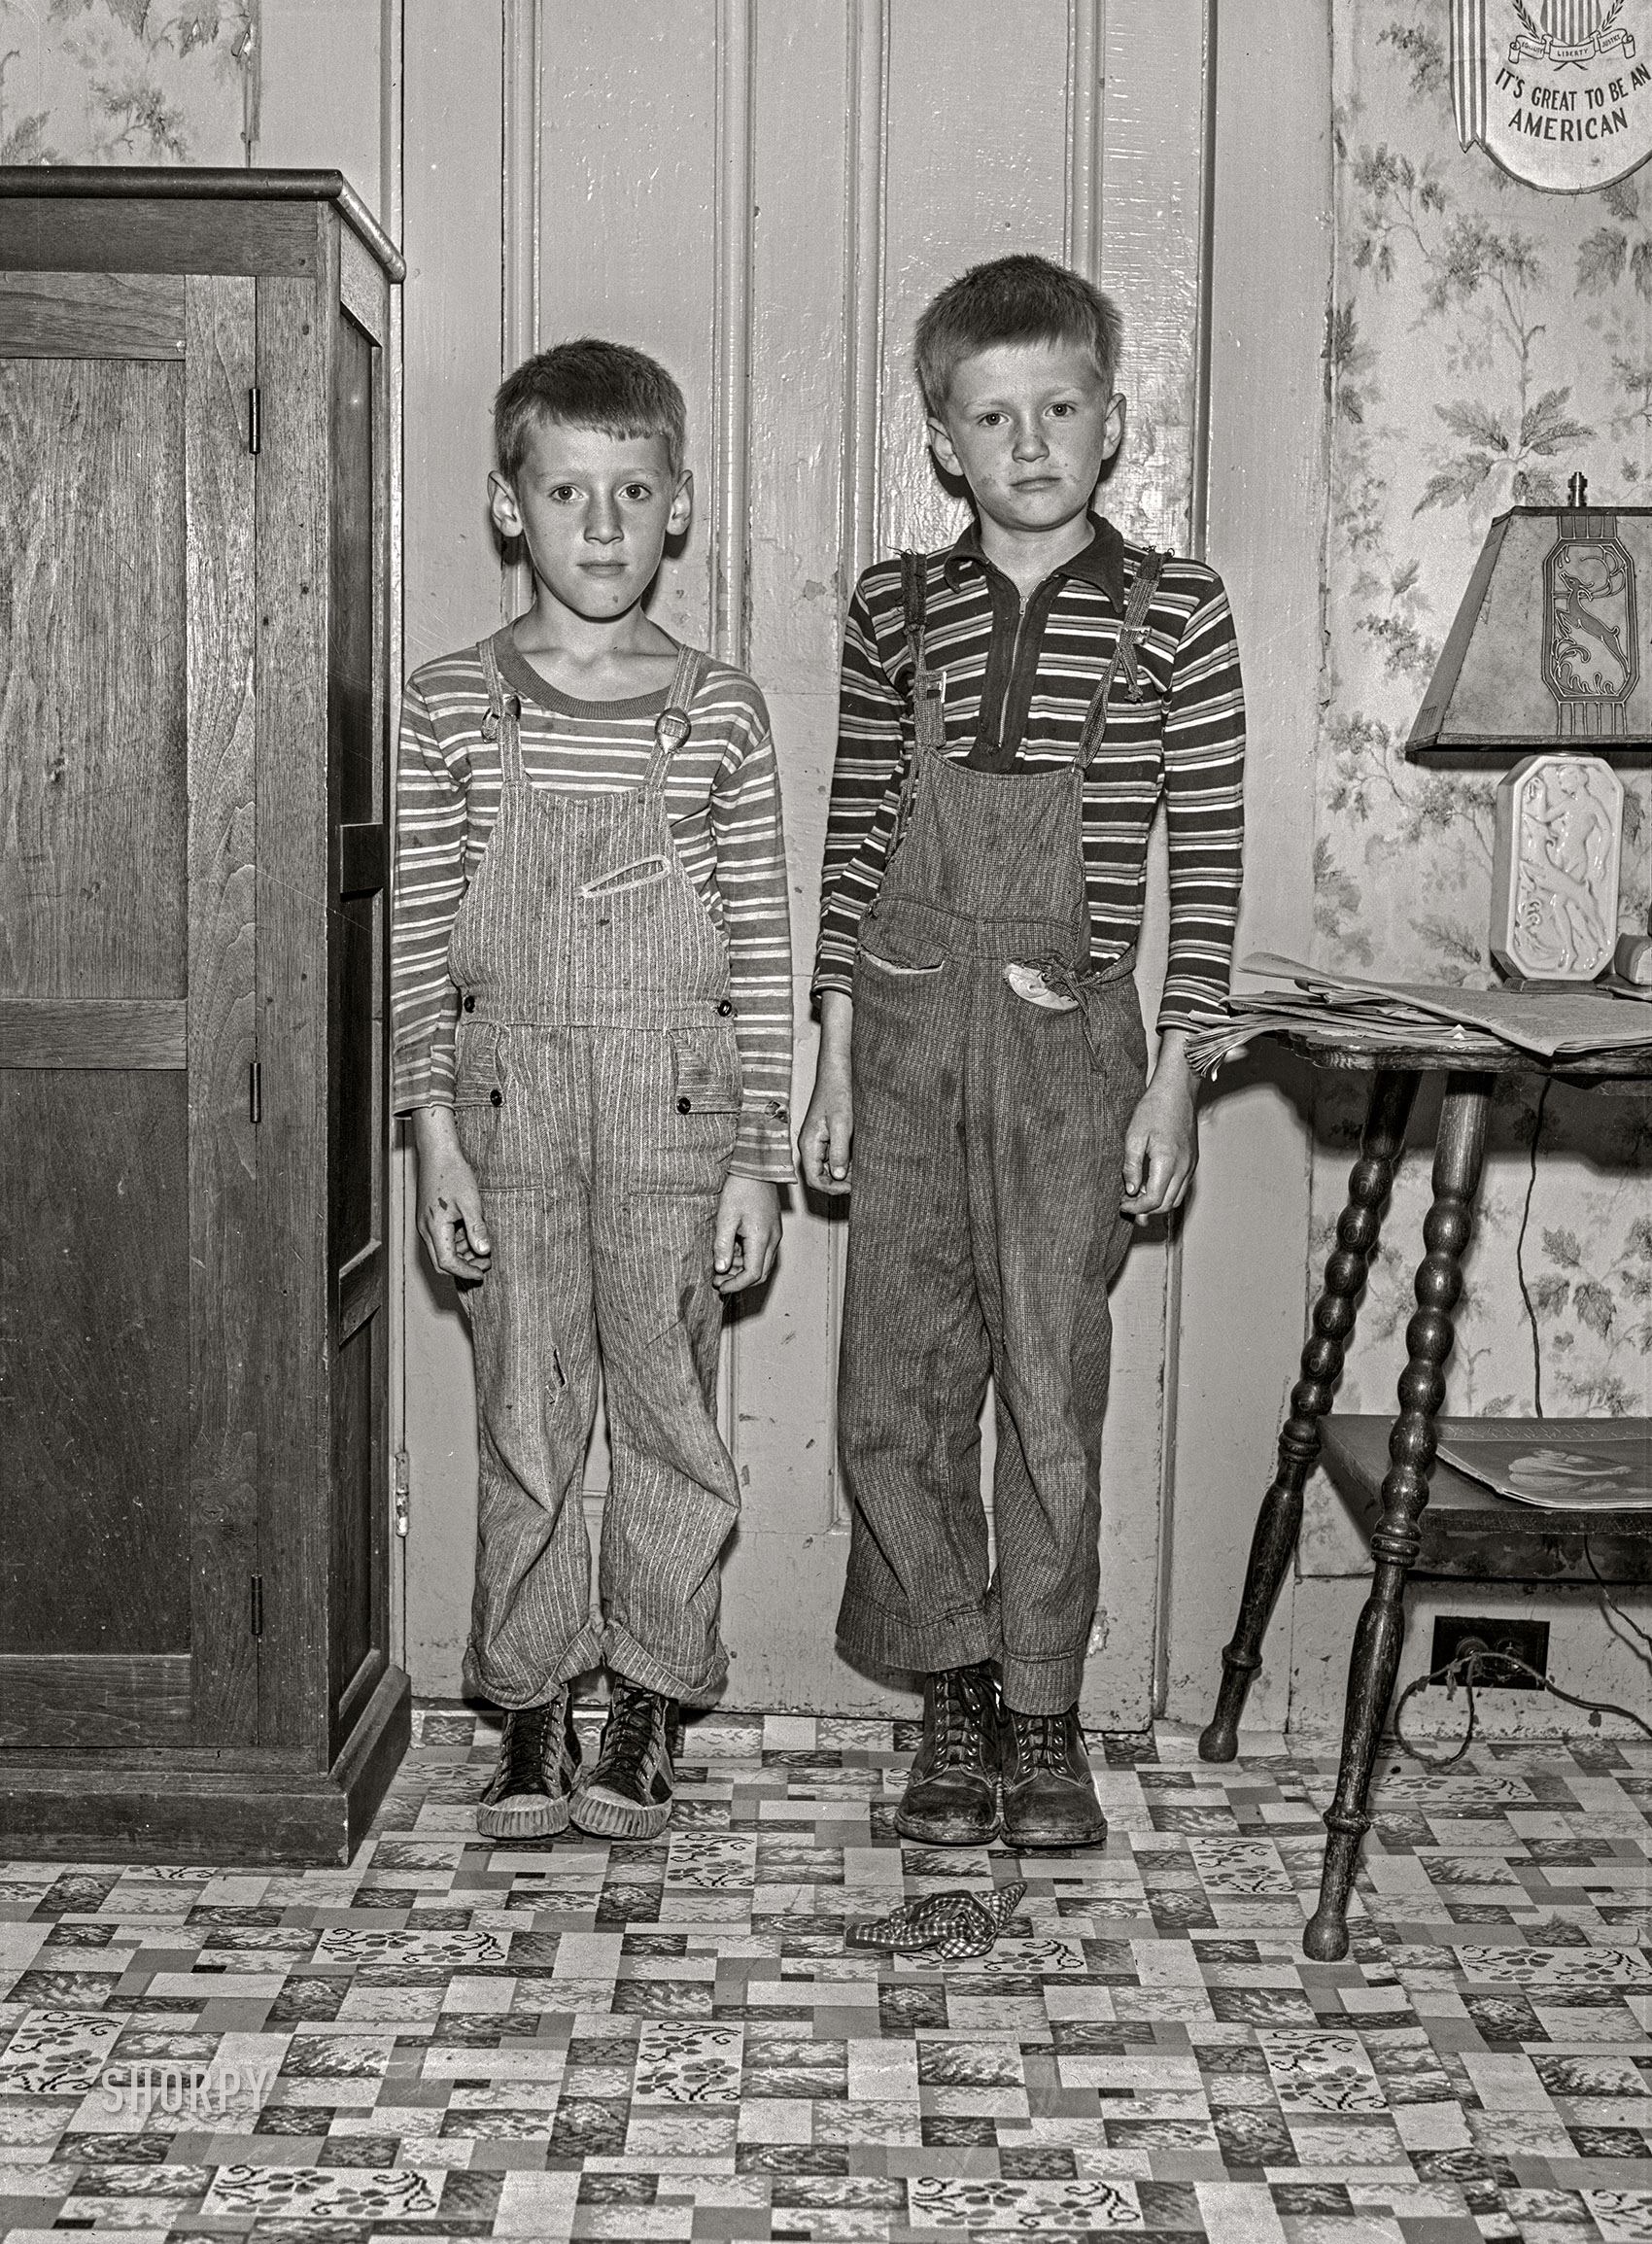 August 1941. "Children of a dairy farmer near Rutland, Vermont." Medium format acetate negative by Jack Delano for the Farm Security Administration. View full size.